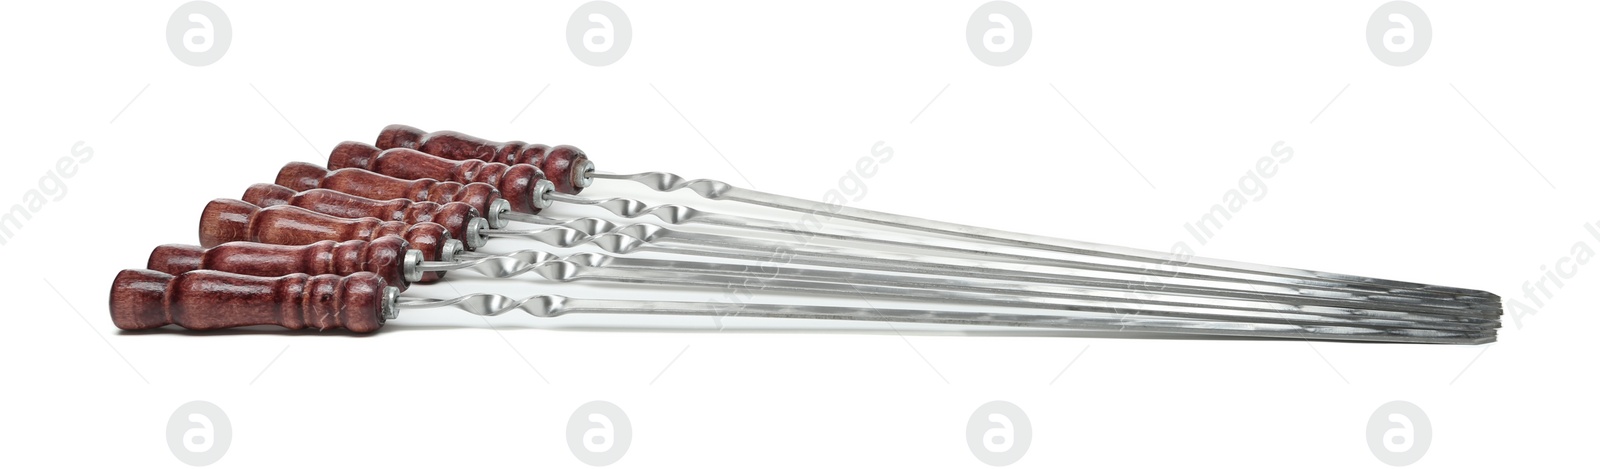 Photo of Metal skewers with wooden handle on white background